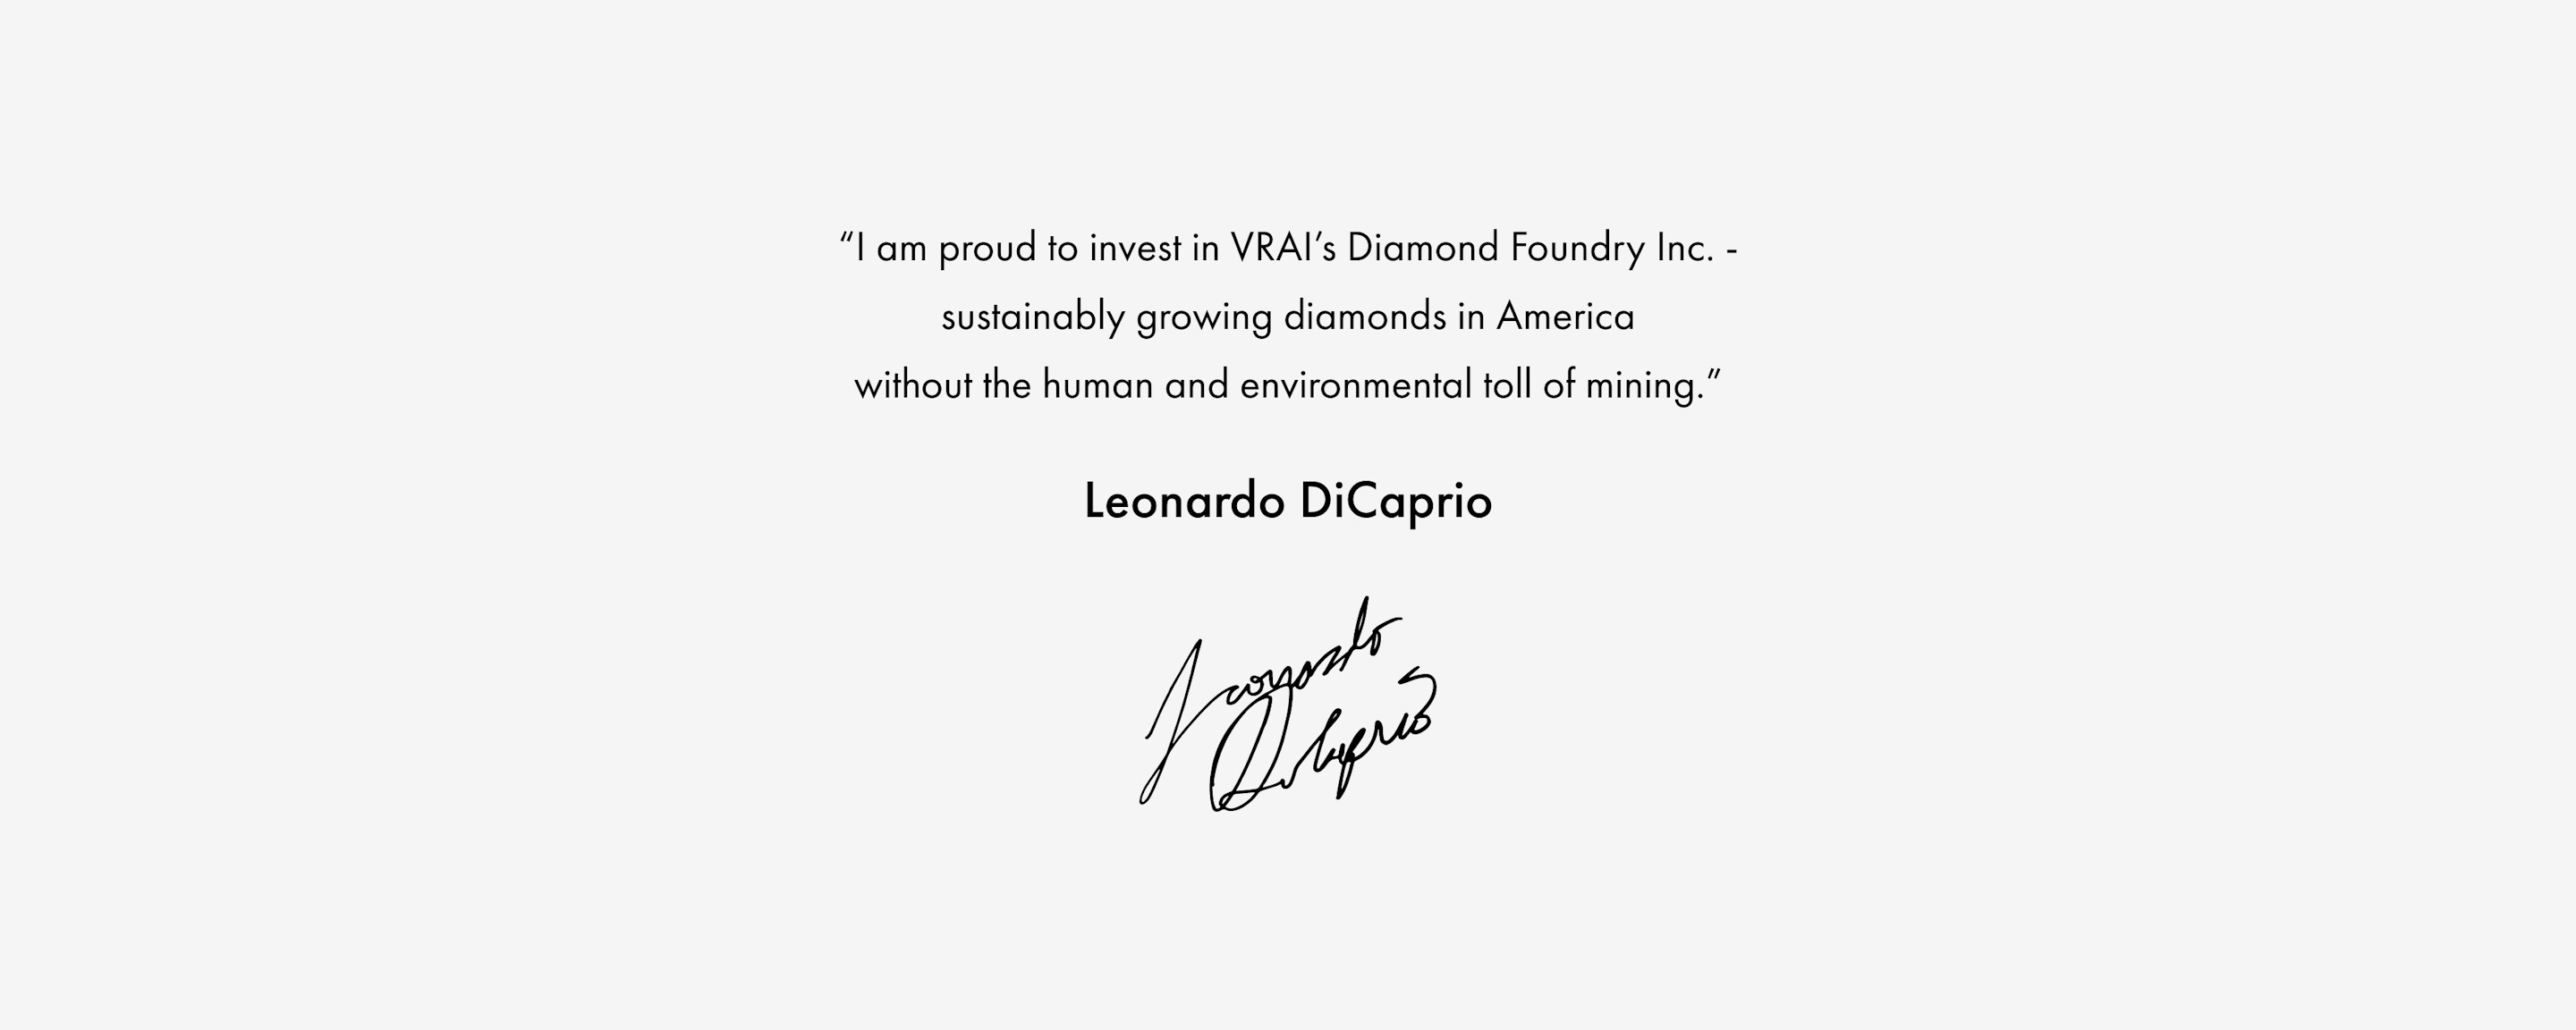 "I am proud to invest in VRAI's Diamond Foundry Inc - sustainably growing diamonds in America without the human and environmental toll of mining." - Leonardo DiCaprio